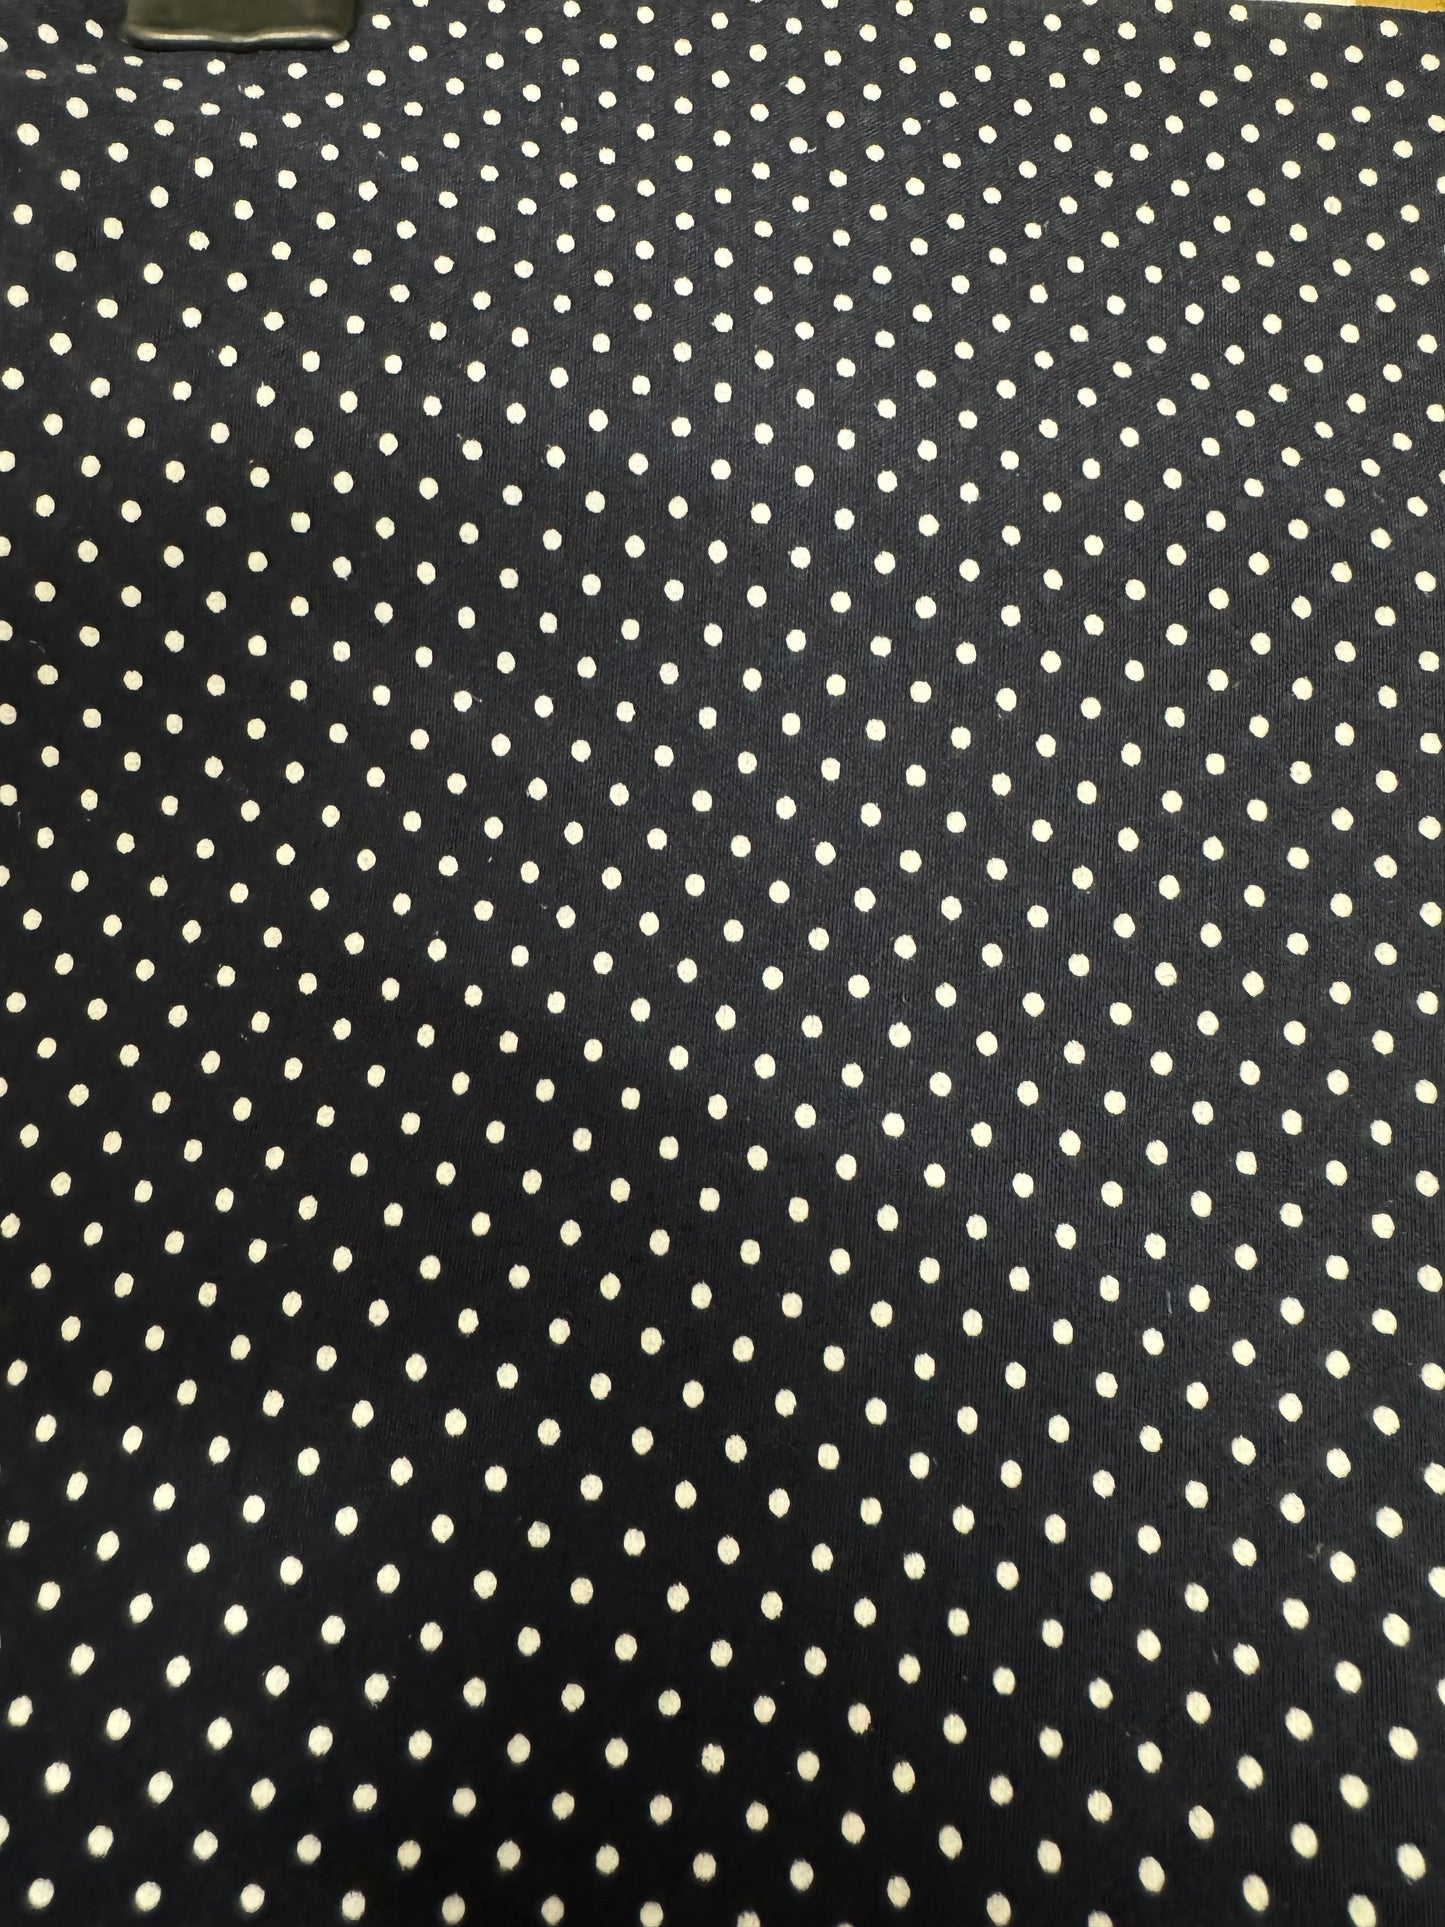 Navy polka dot cropped stretchy sized trousers sizes 10-22